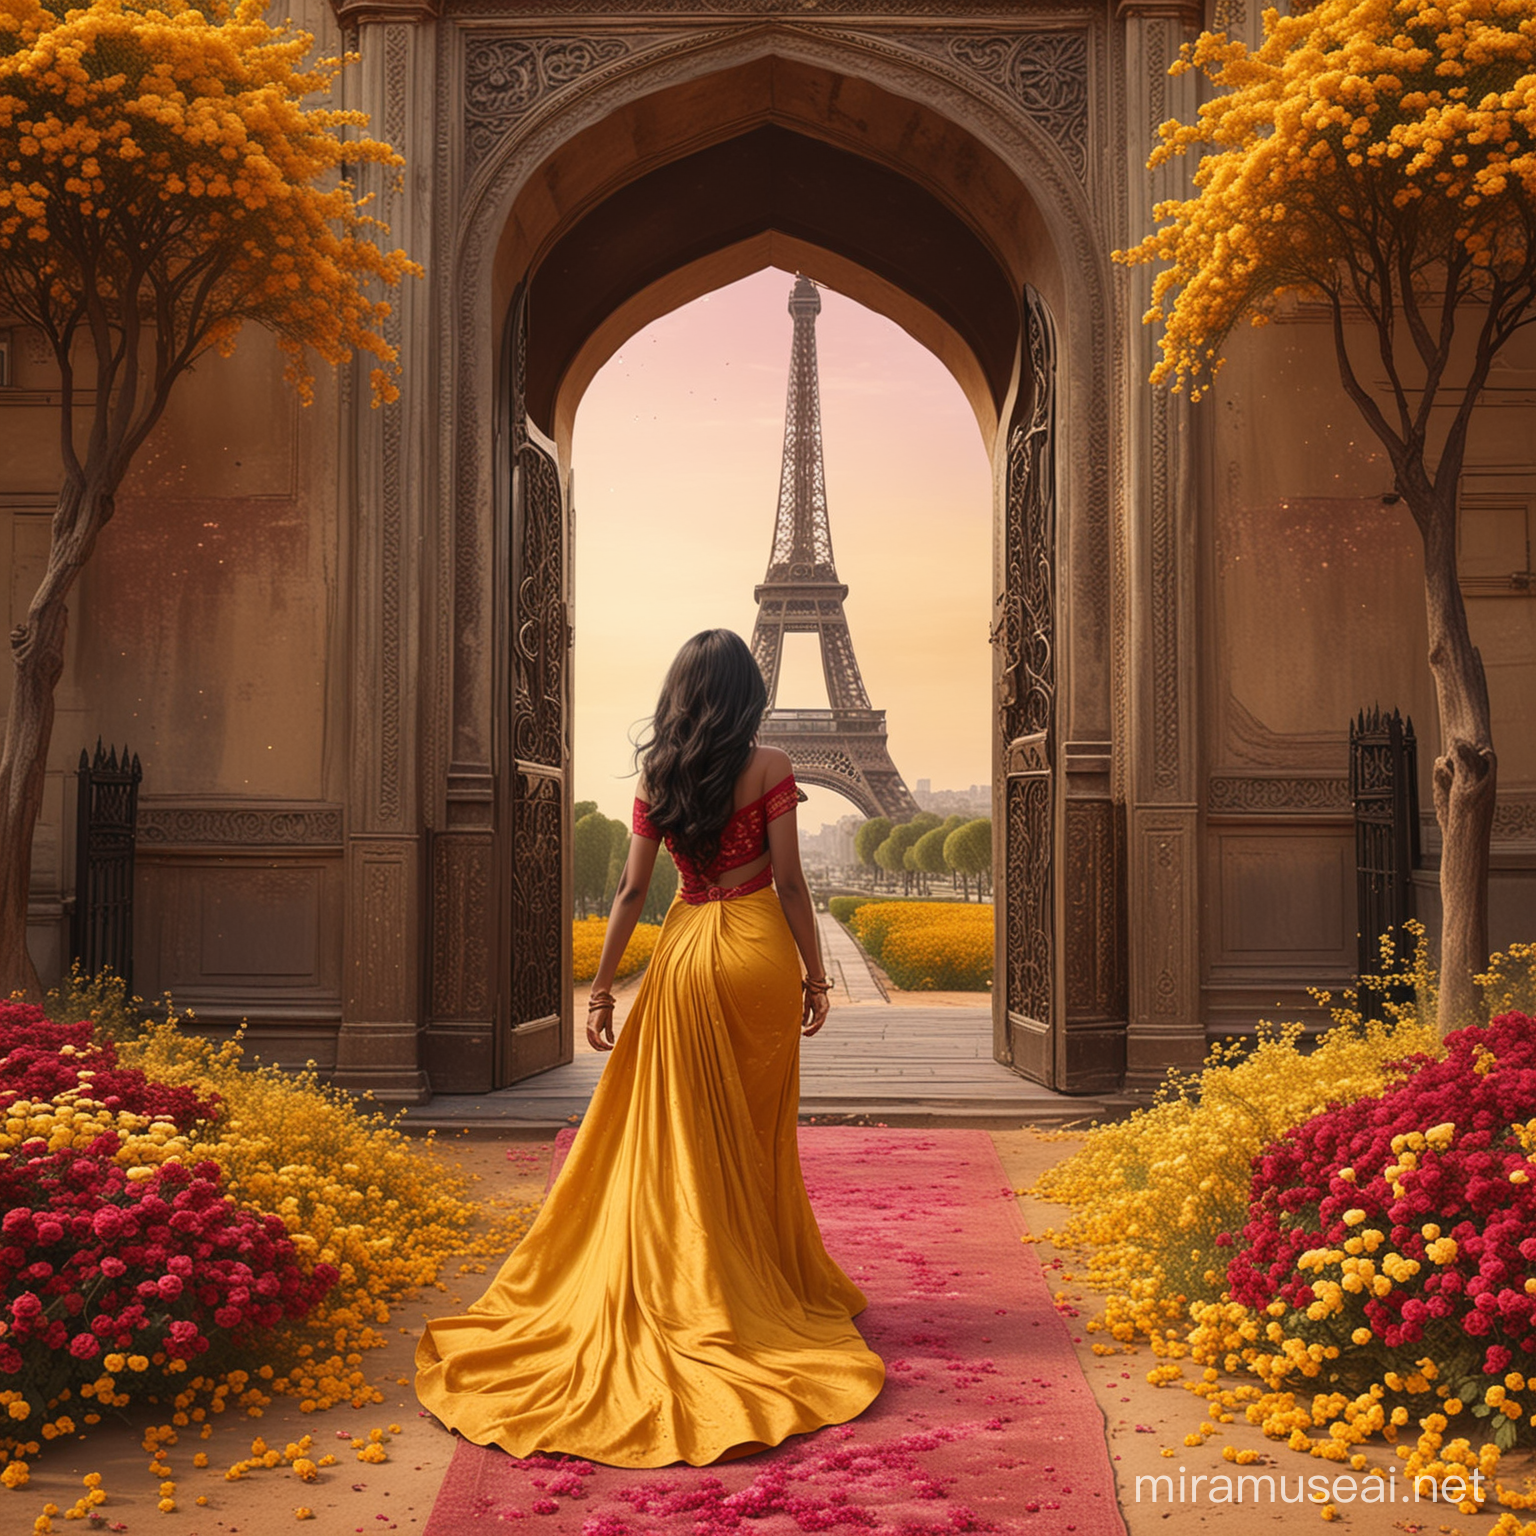 A beautiful indian princess, from behind, walking to an opened golden arabian door, surrounded by dark yellow flowers and dark pink dust on the ground. Long wavy black hair. Elegant long dark red and yellow dress, sari tissu. Background tower eiffel view. background floral trees. 8k, fantasy, illustration, digital art, illustration art, fantasy art, fantasy style